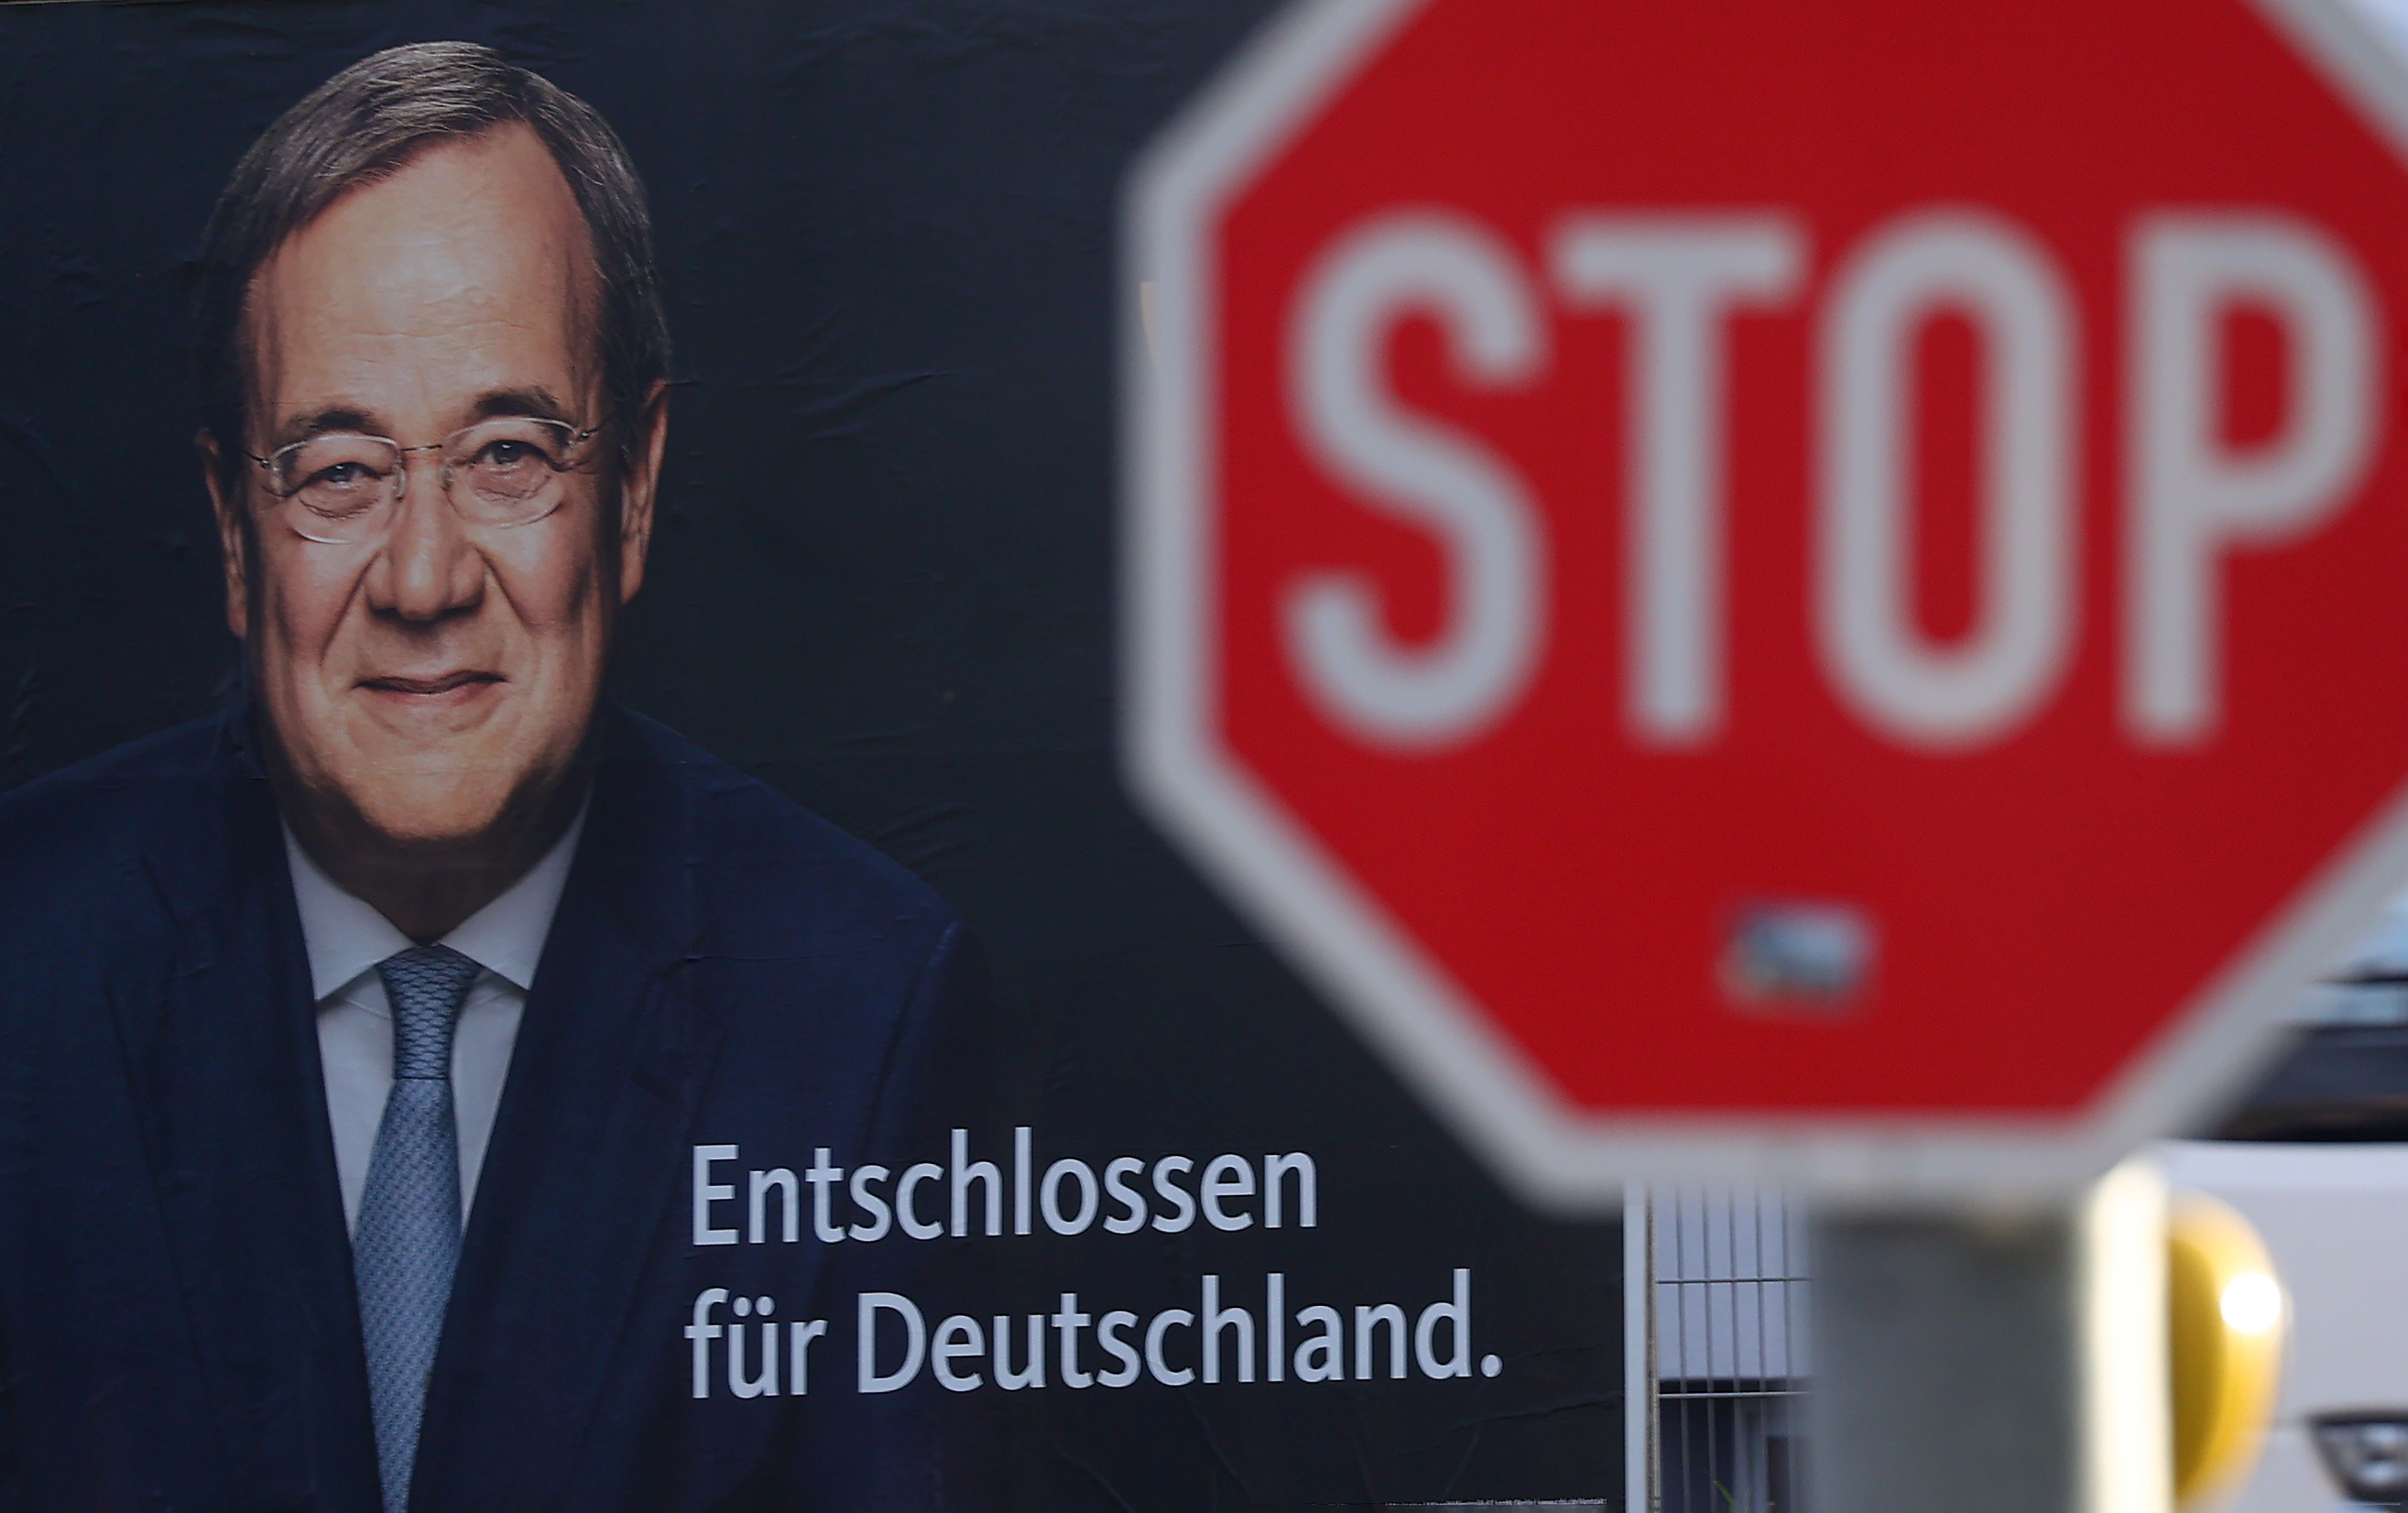 CDU leader Armin Laschet is pictured on an election campaign placard in Heusenstamm